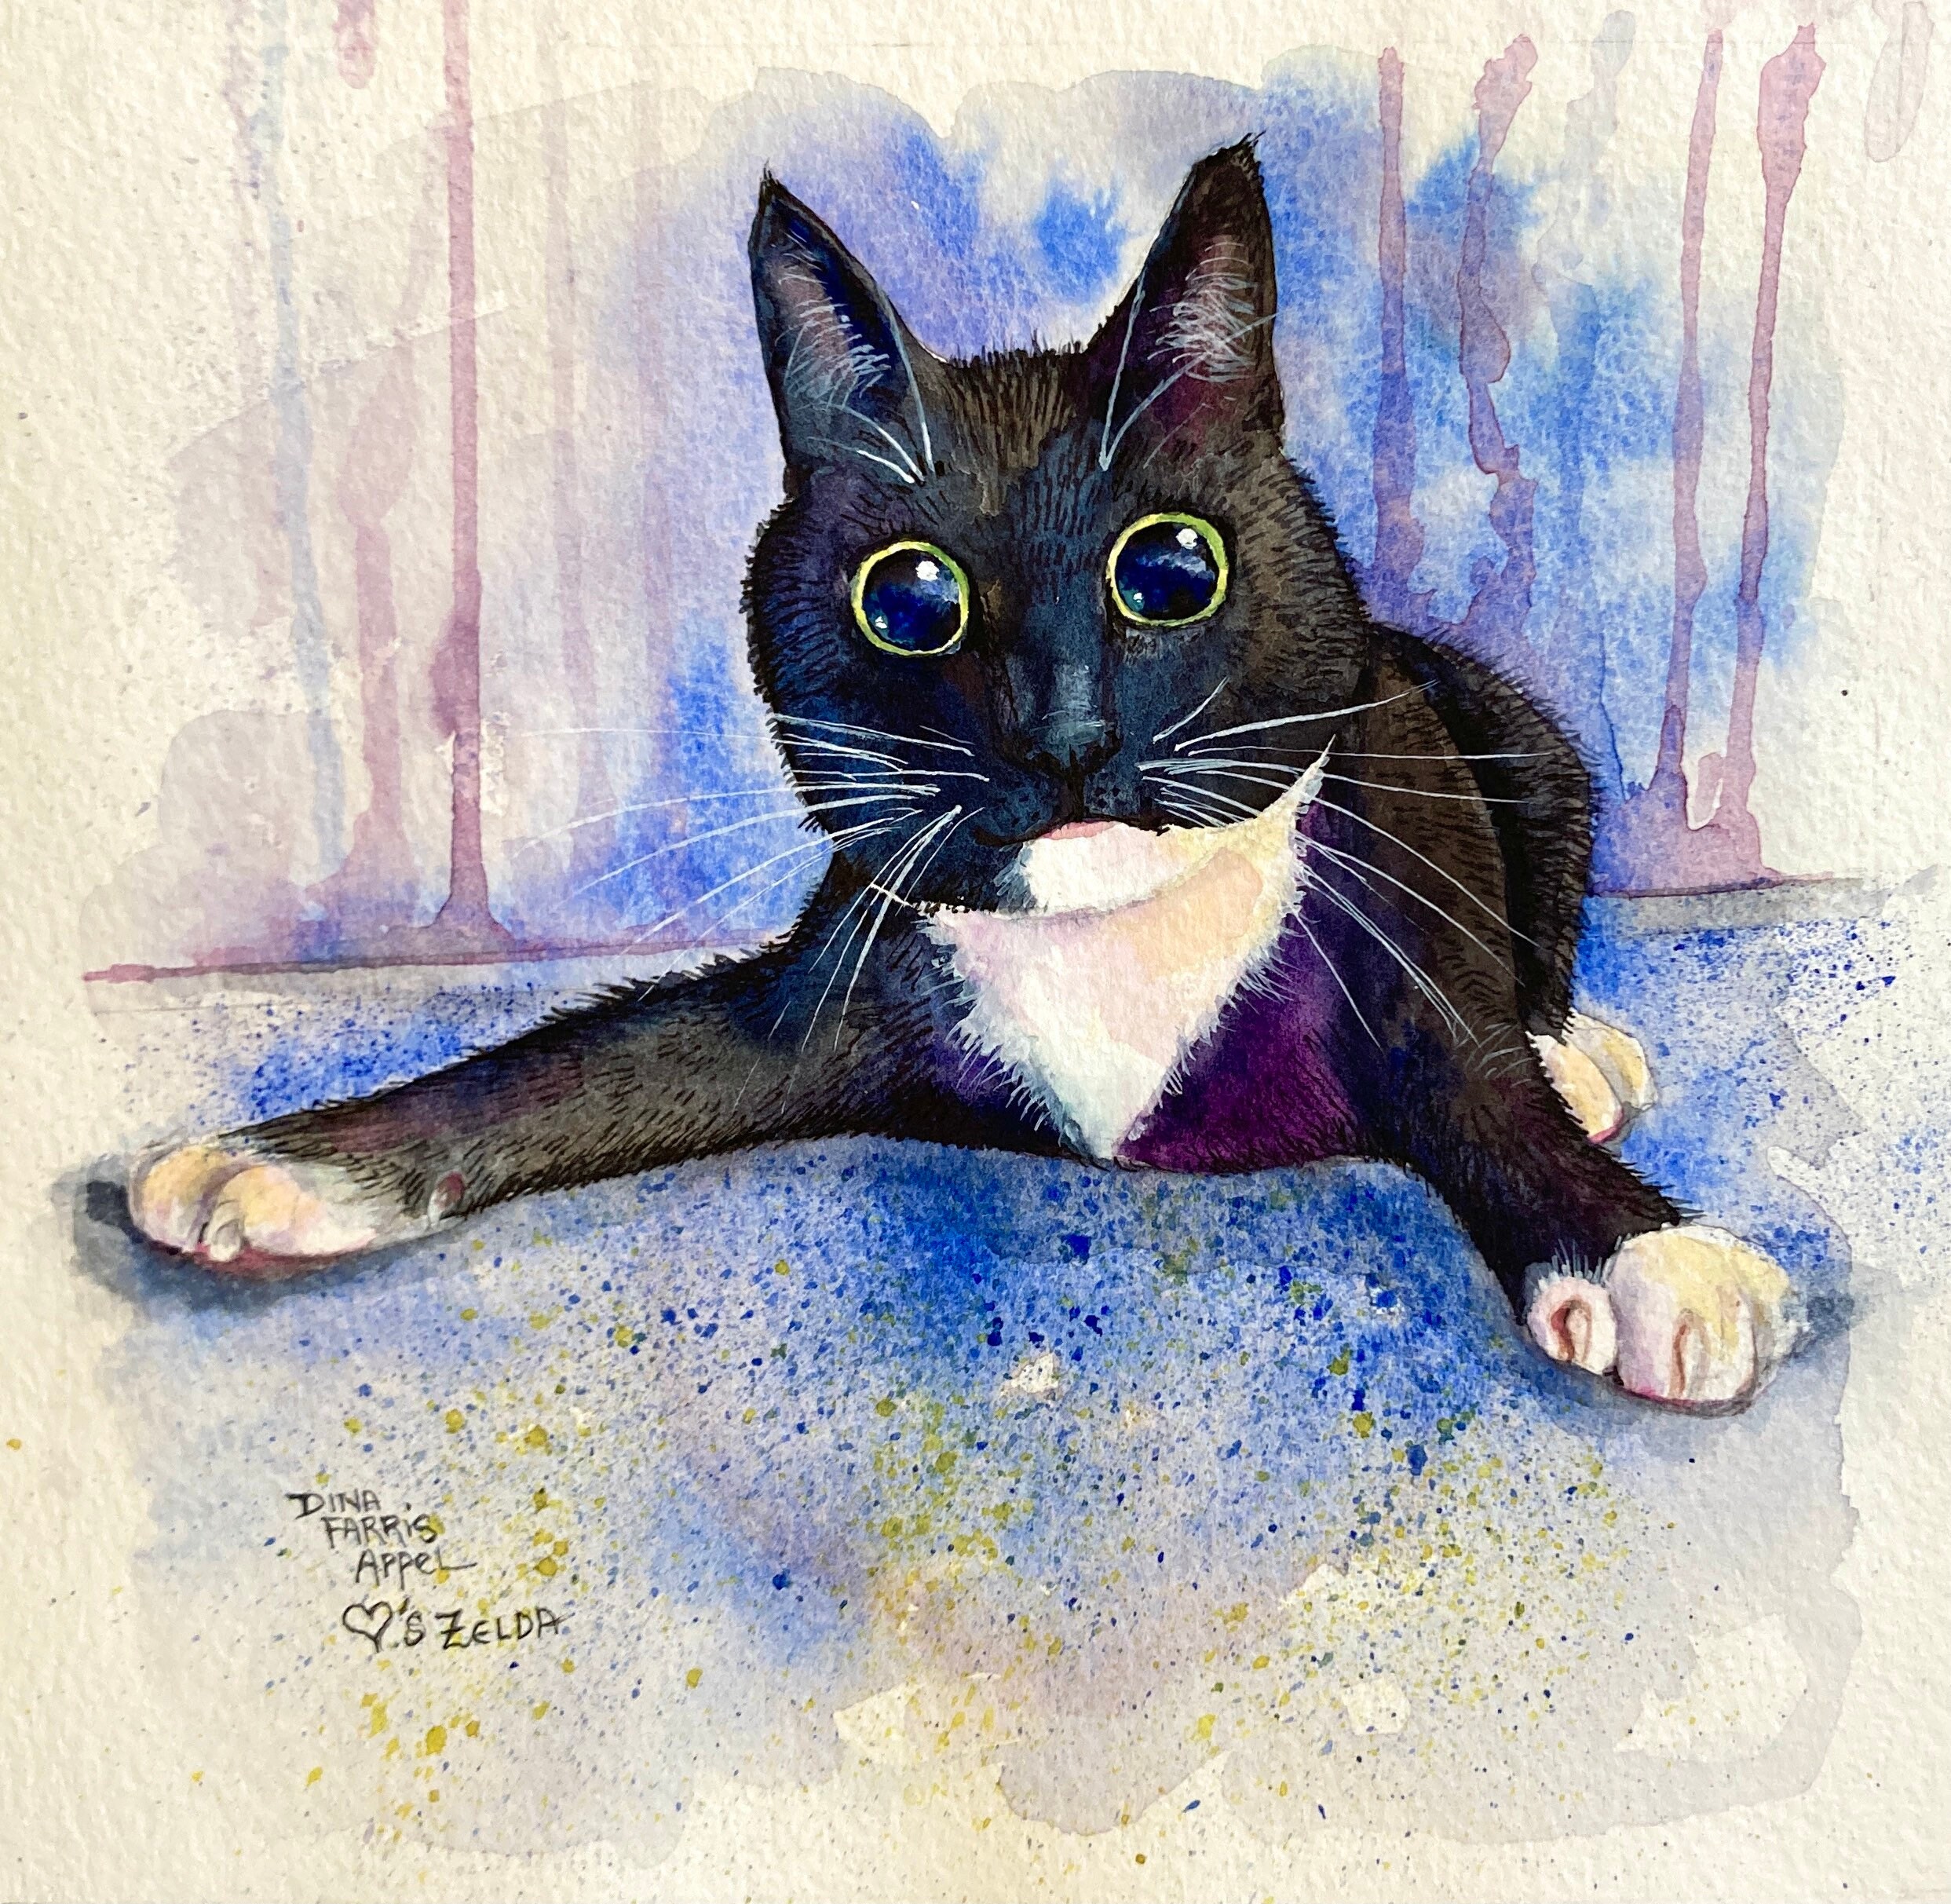 Black and White Tuxedo Cat Art Print Sepia Watercolor Painting by Artist DJR 